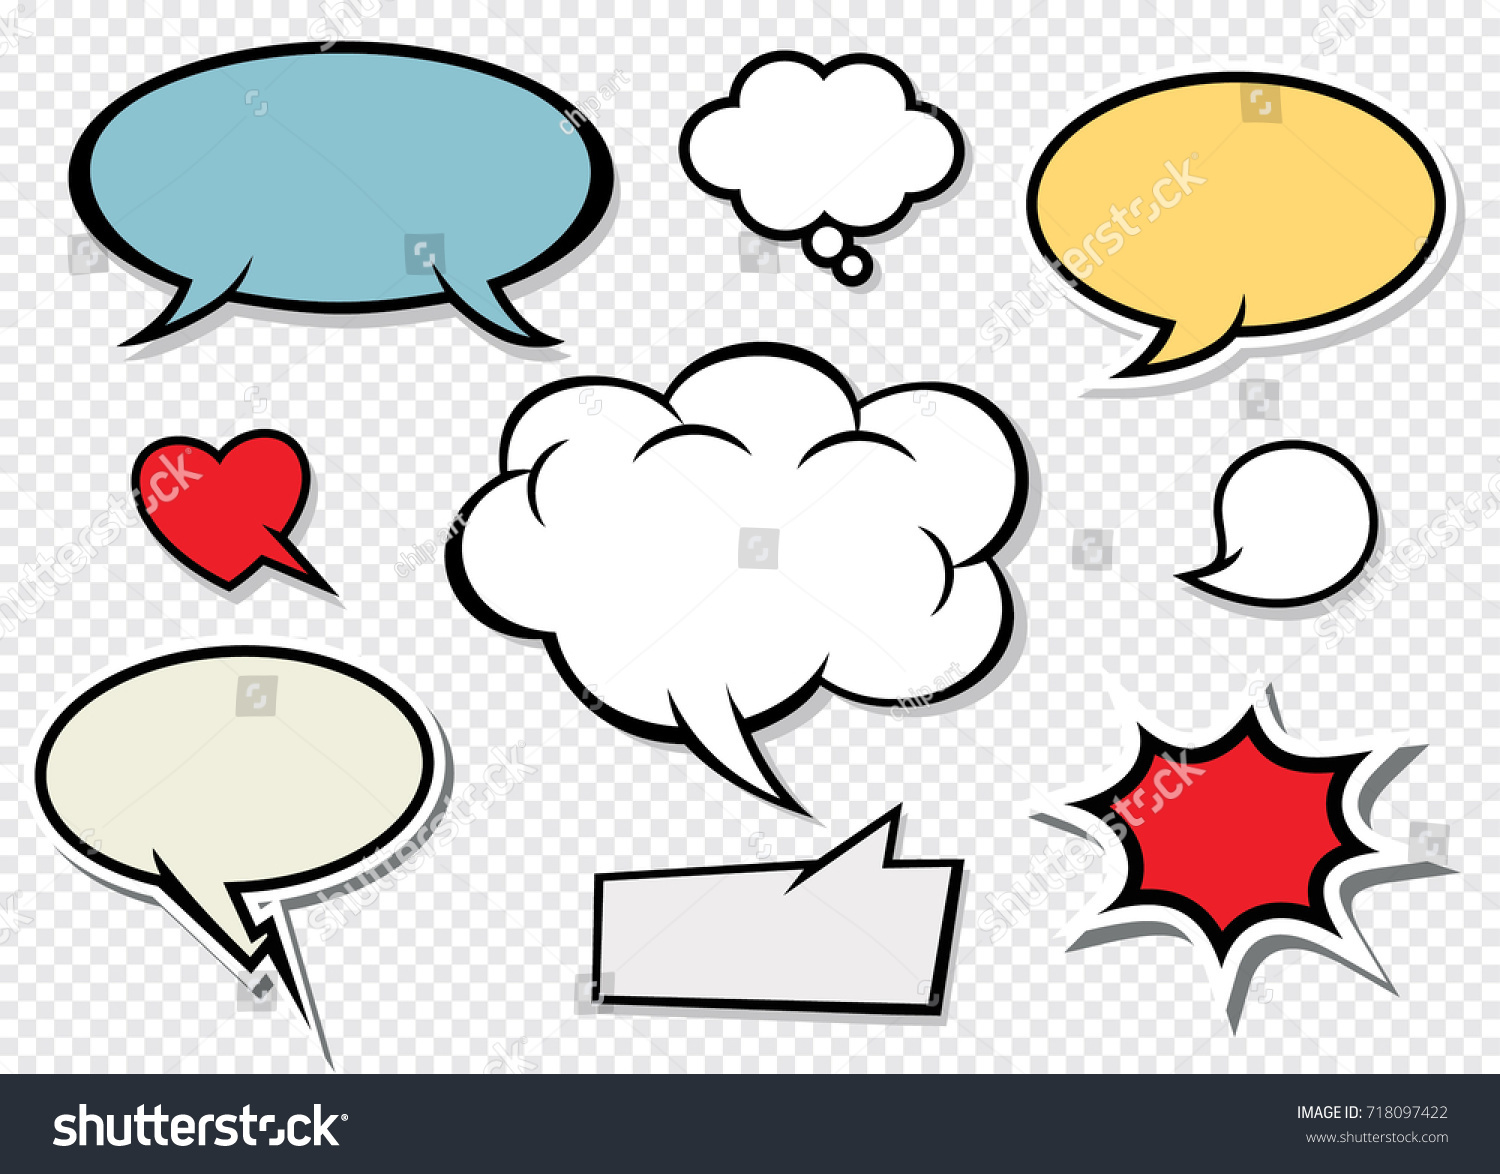 Download Comic Book Style Speech Bubbles Set Stock Vector Royalty Free 718097422